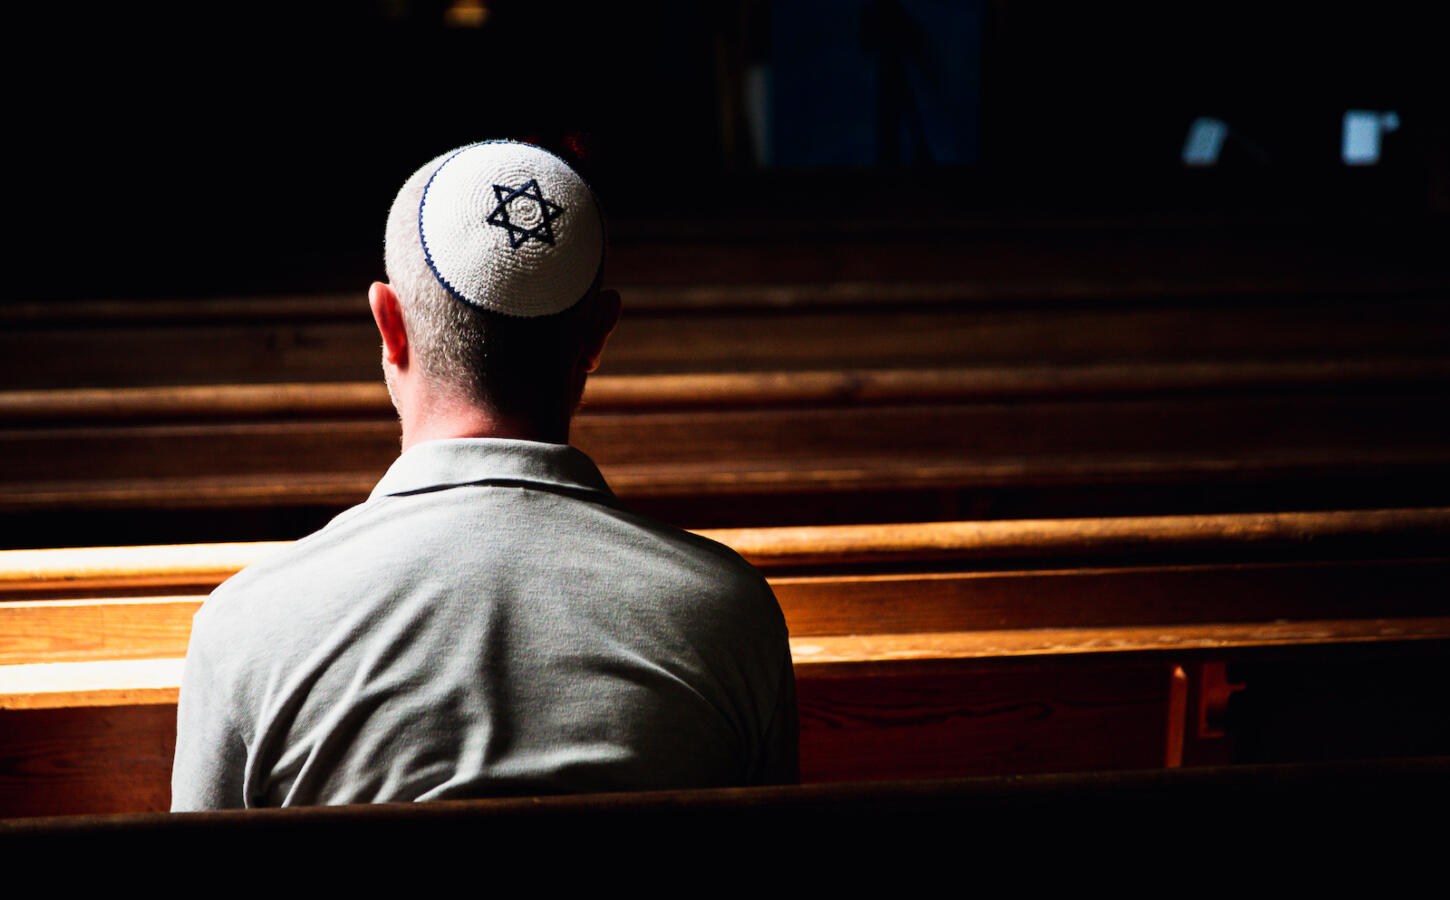 Close up image depicting a young caucasian Jewish adult man in his 30s inside a synagogue. He has his head bowed in prayer and he is wearing the traditional Jewish skull cap - otherwise known as a kippah or yarmulke - on his head. The man has a beard and the background of the synagogue is blurred out of focus. Horizontal color image with copy space.